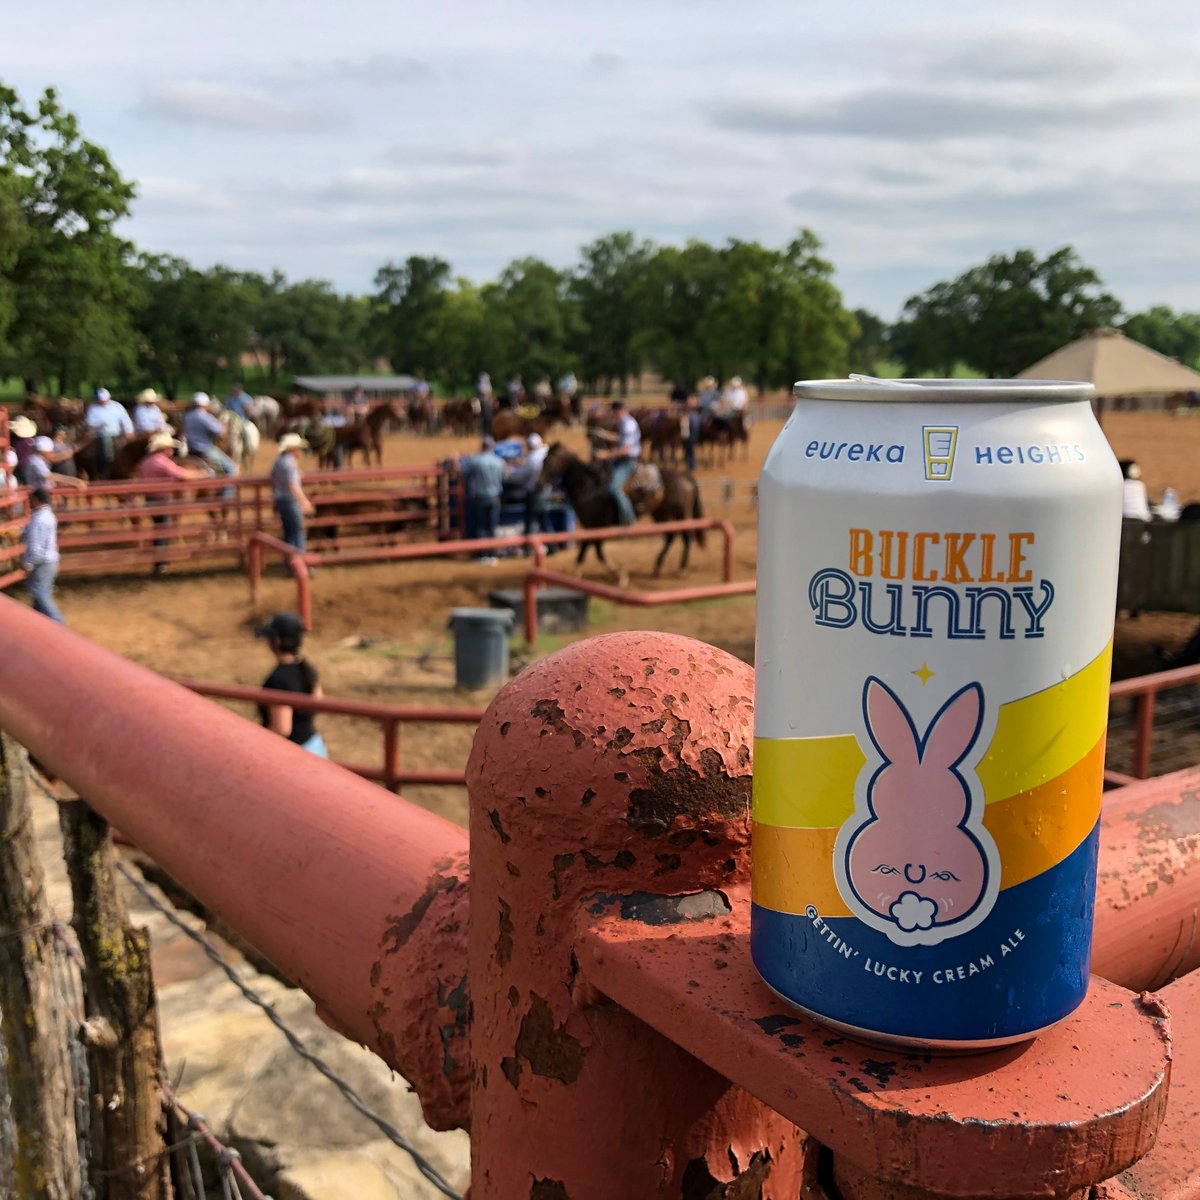 Every day is Go Texan Day for Buckle Bunny, so today is technically Go Texaner Day. This crushable Cream Ale was born out on the ranch way before it hopped into all of our hearts. Taproom is open until 10pm with Rosalitas Food Truck.